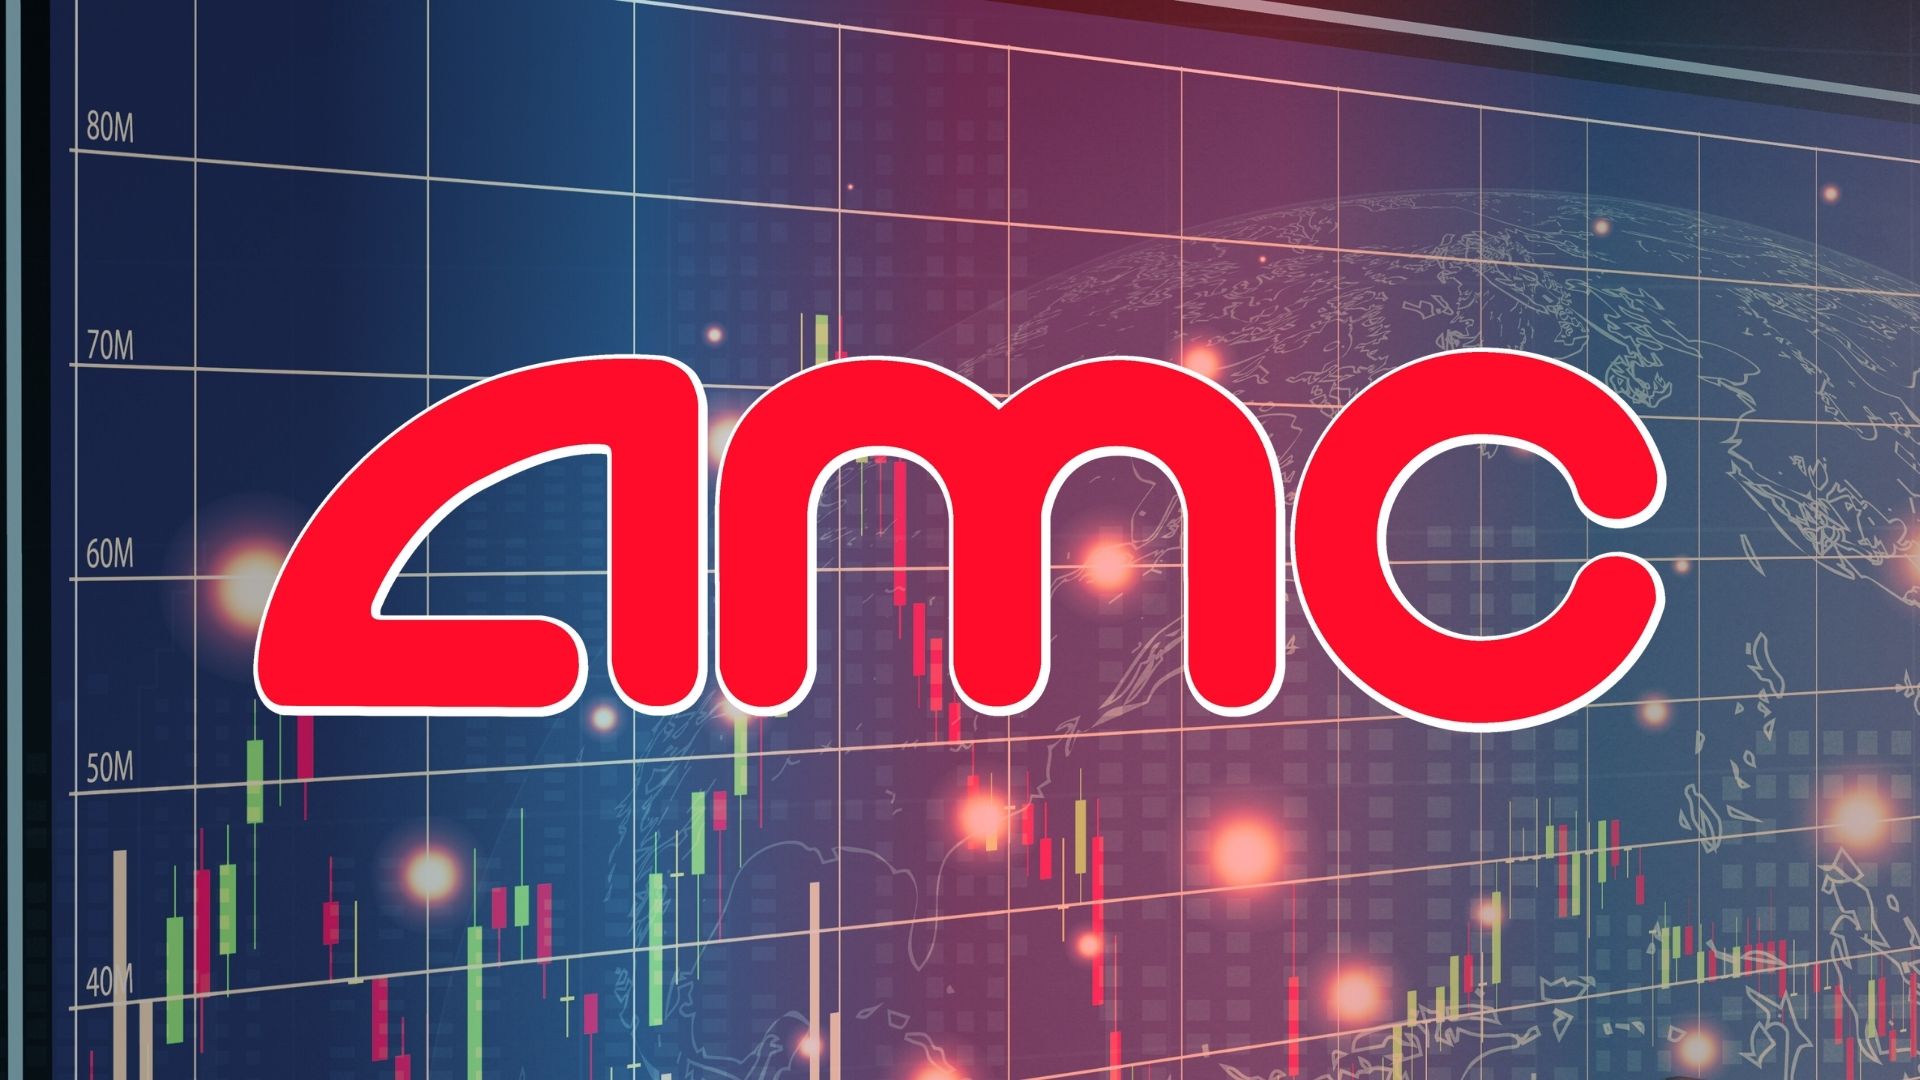 AMC Stock Price Has Potential To Reach $45, Suggests Analysts 